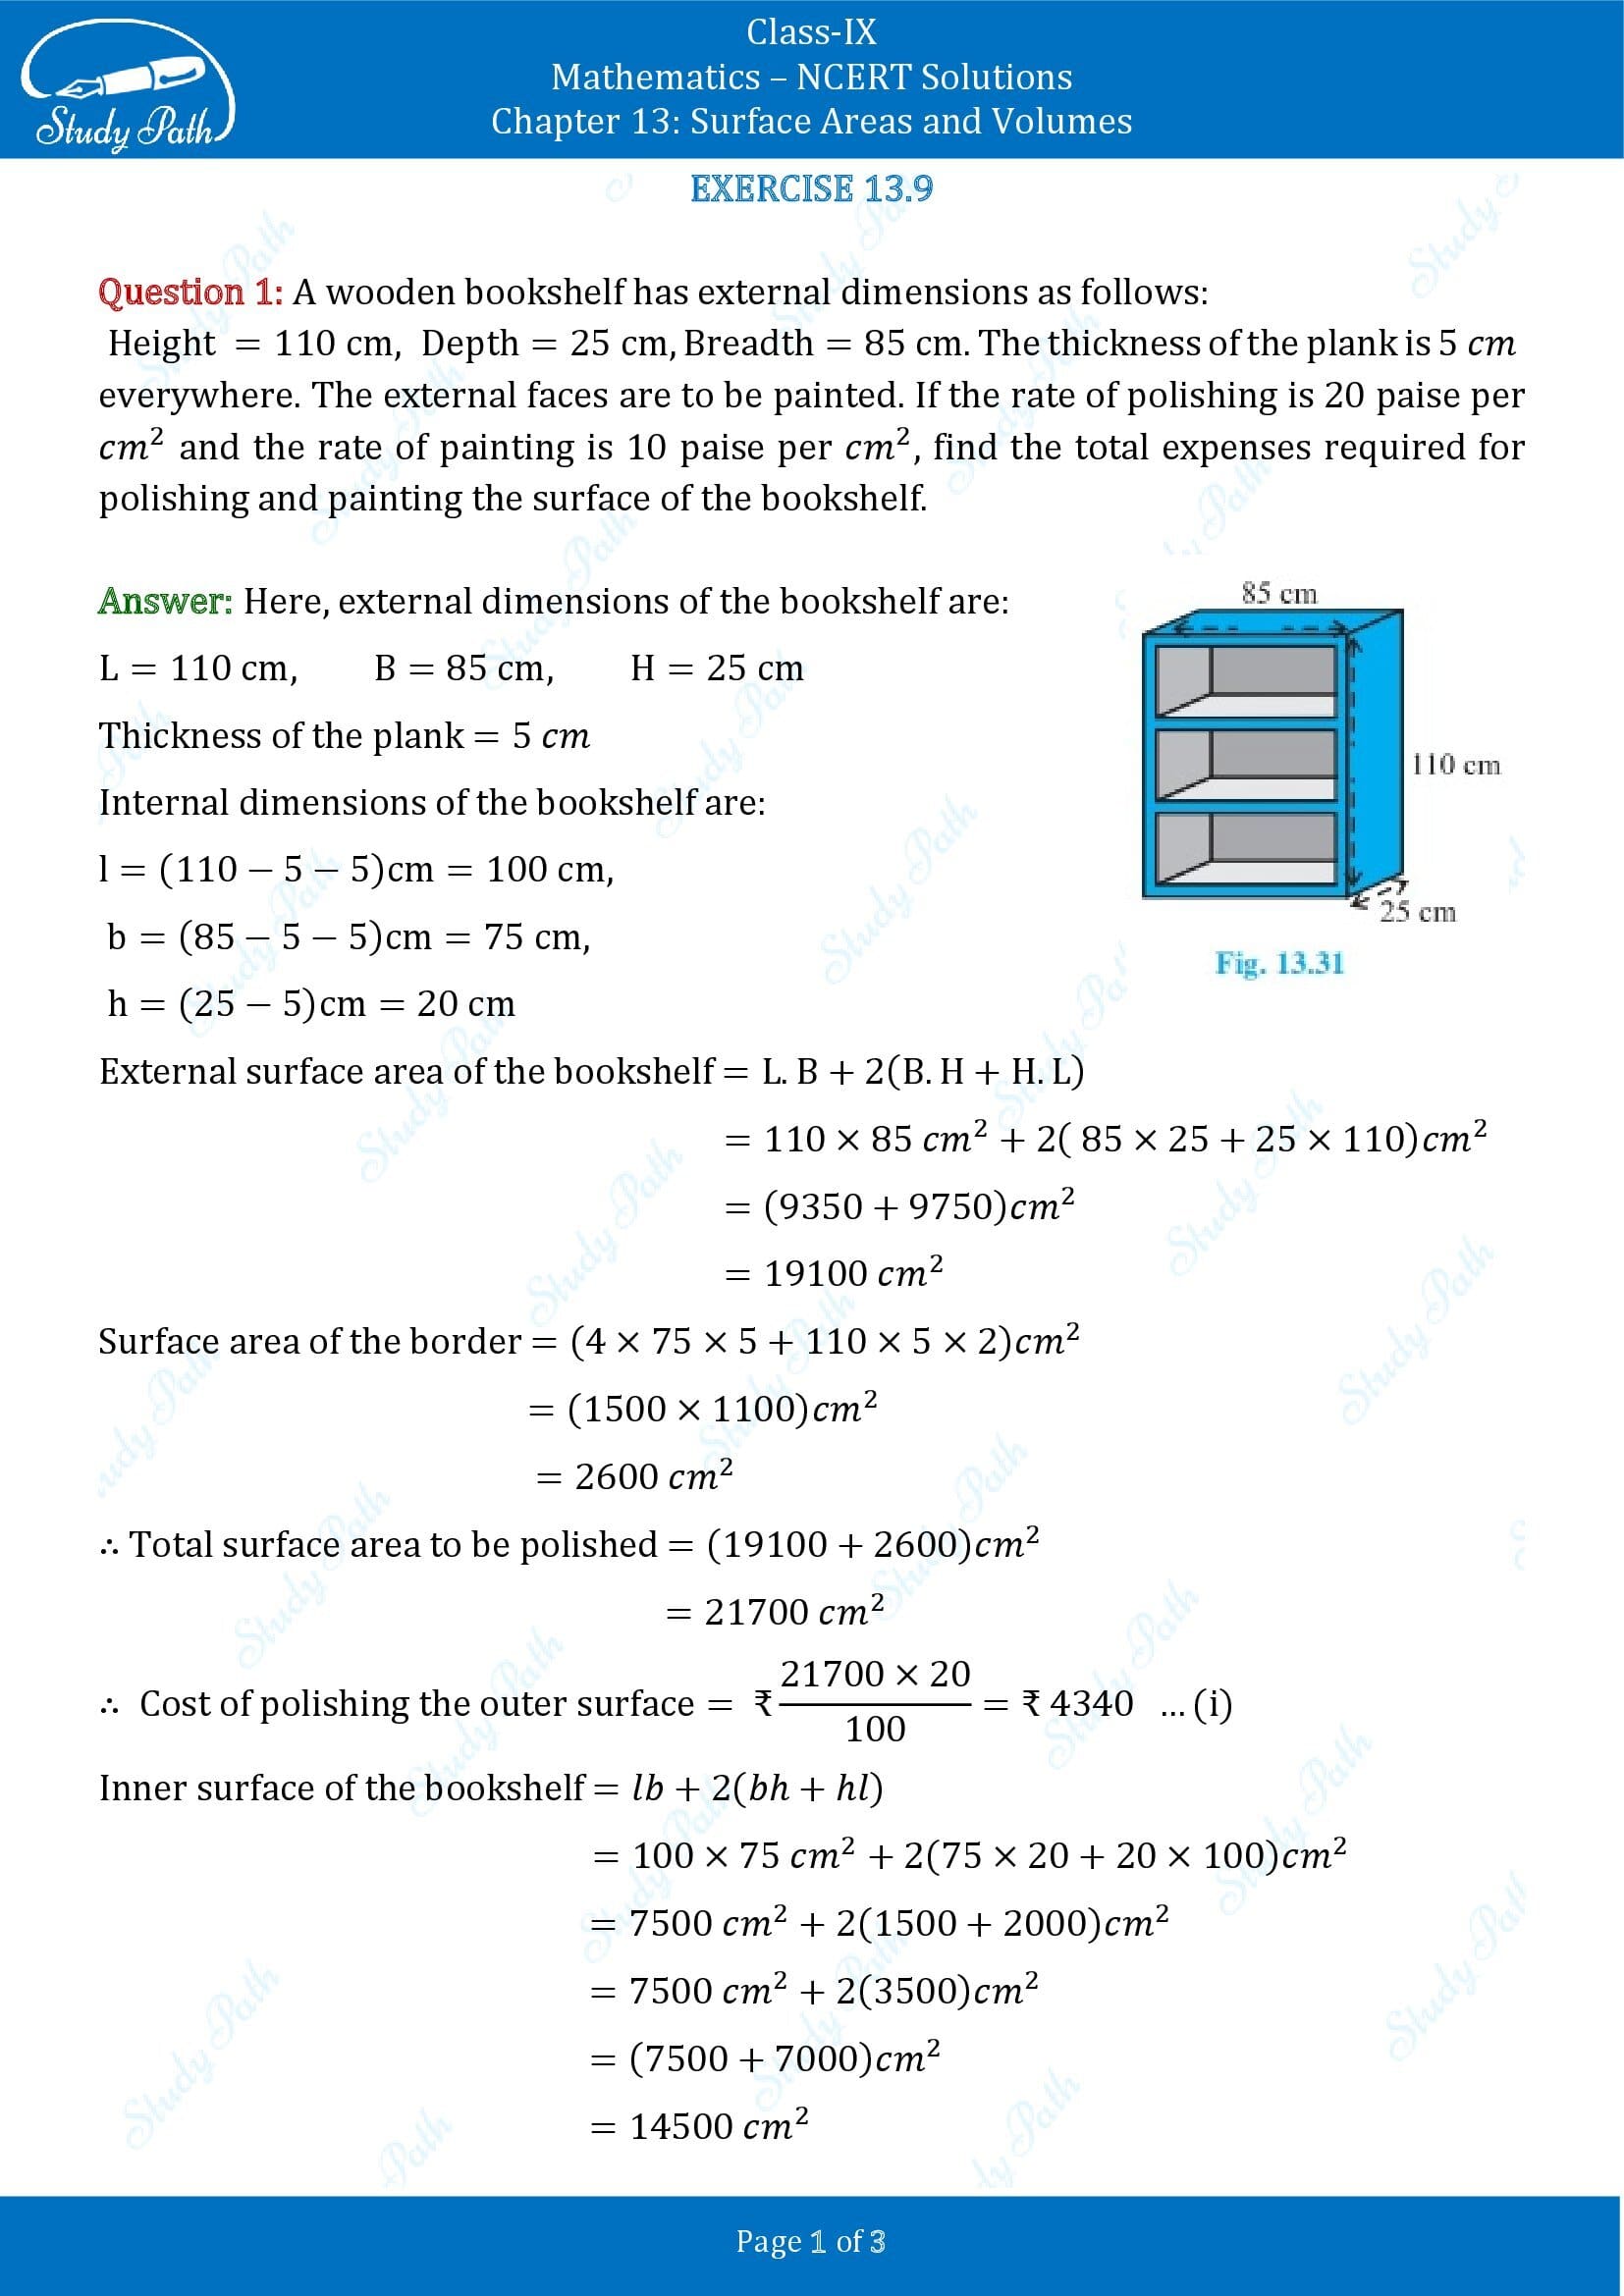 NCERT Solutions for Class 9 Maths Chapter 13 Surface Areas and Volumes Exercise 13.9 00001